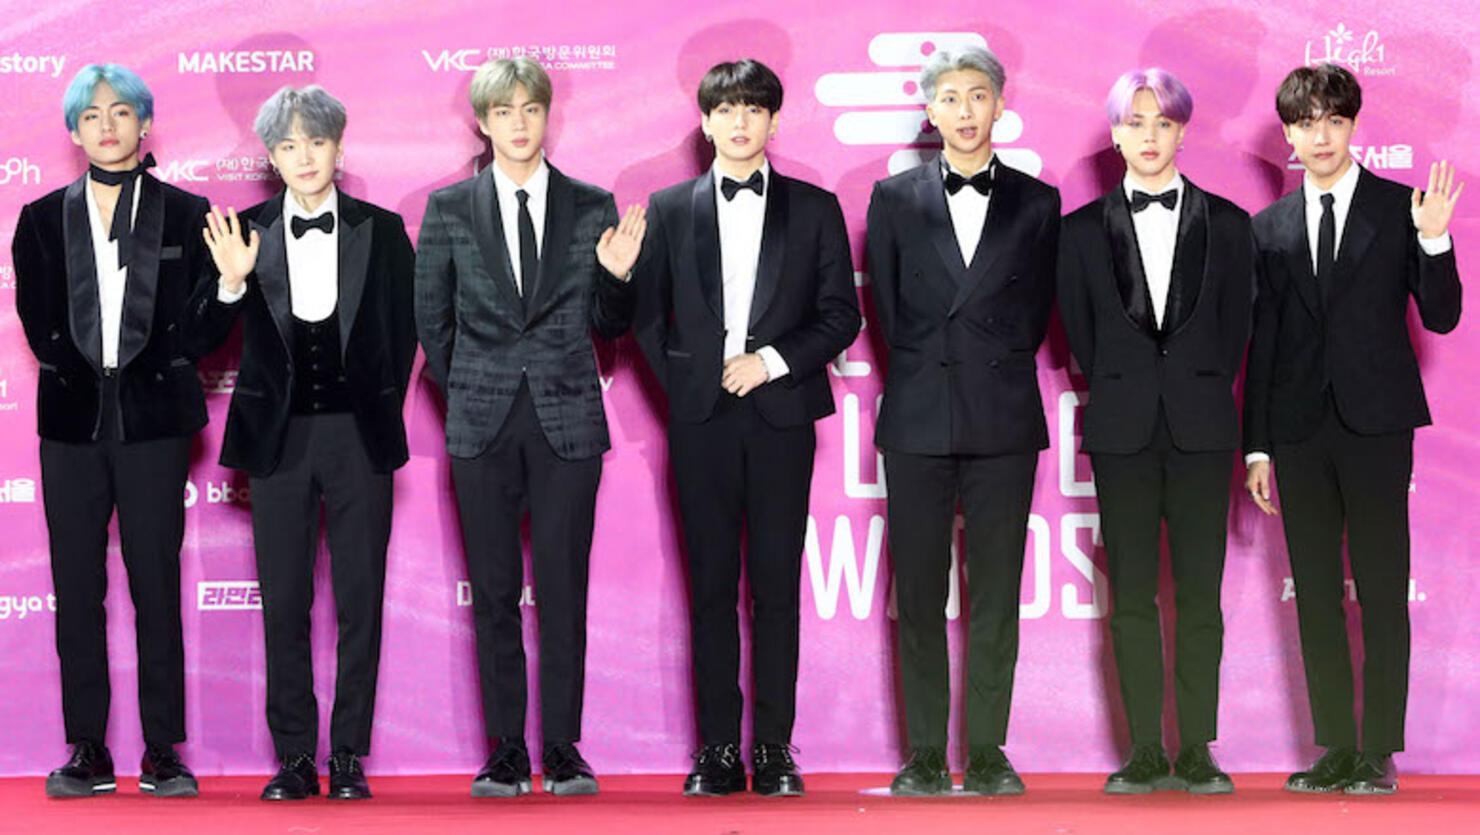 BTS to appear at the 2019 Grammys